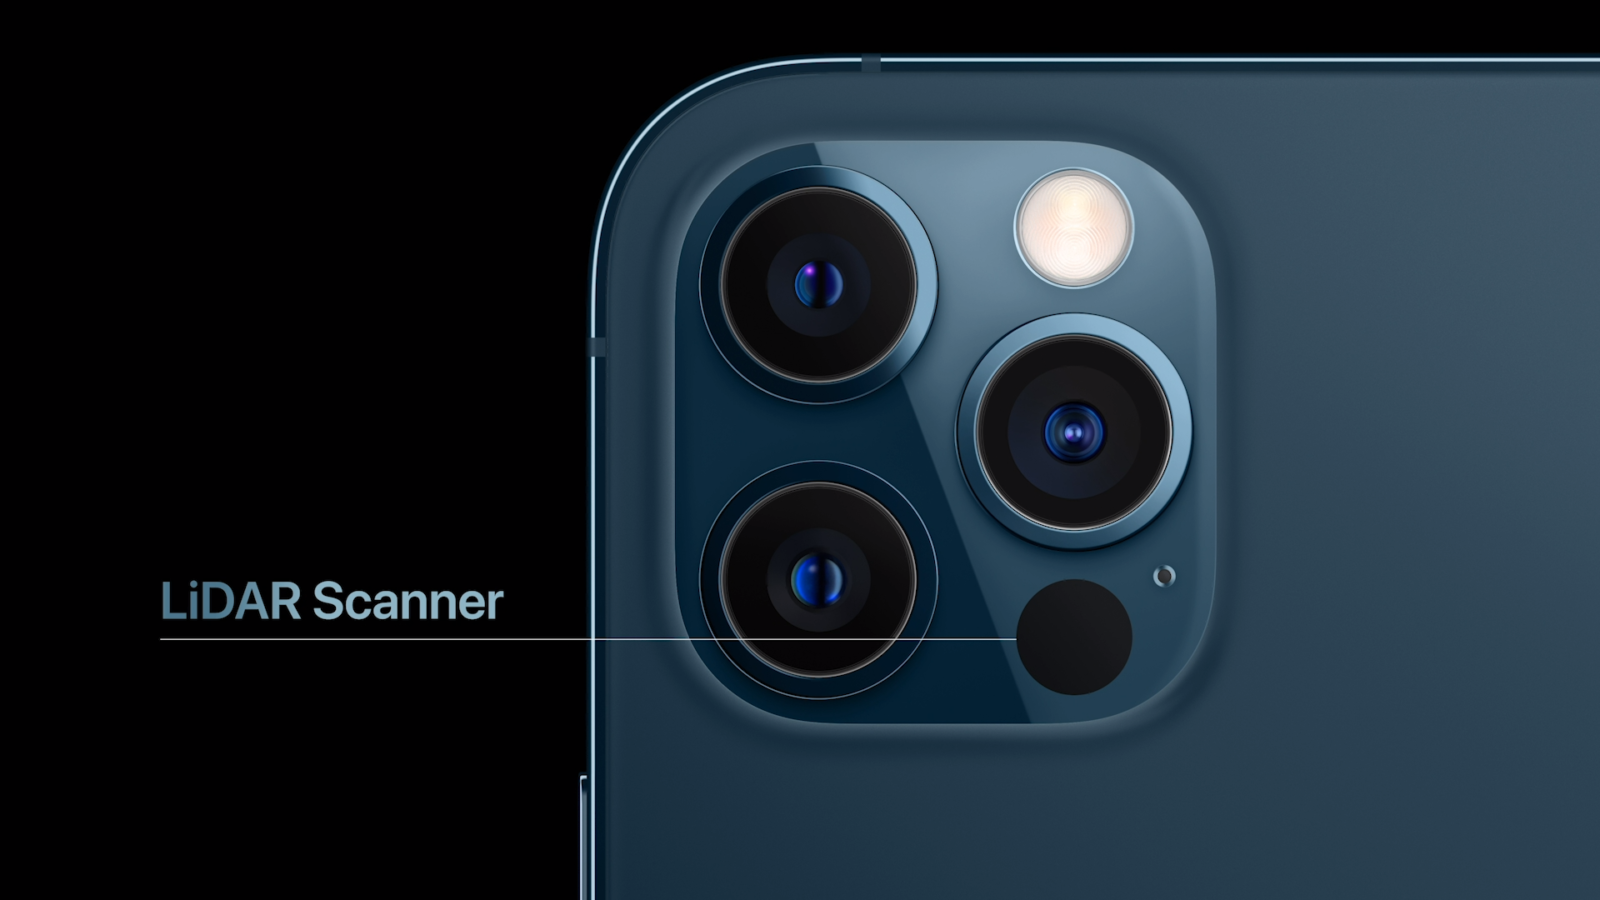 iPhone 12 Pro and Pro Max Feature a LiDAR Scanner – Focus Six Times